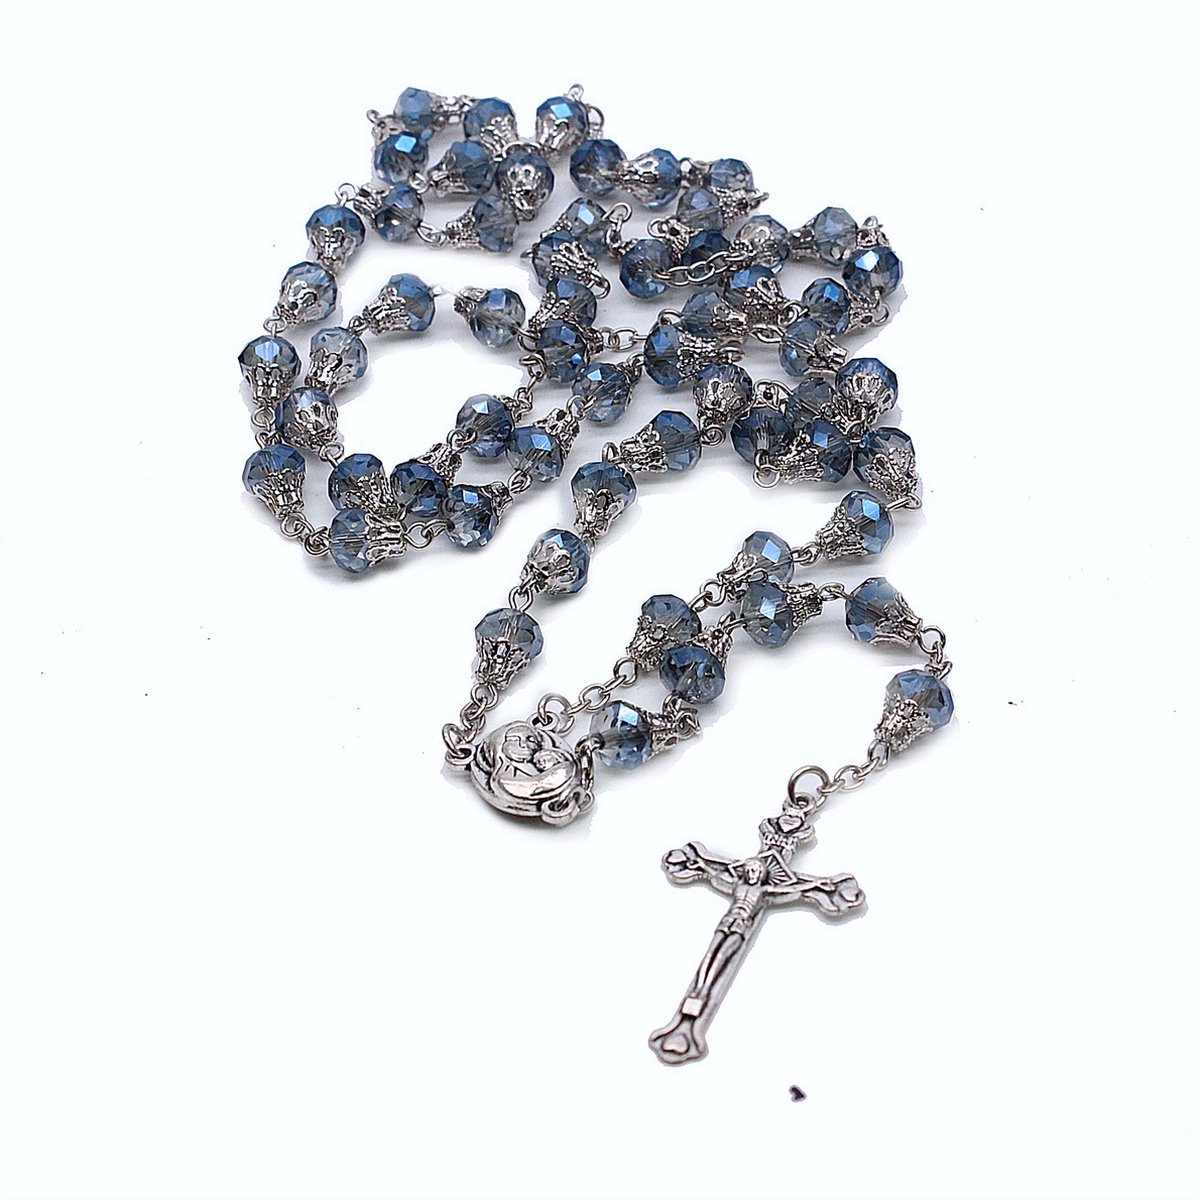 ICYBOY 18K Religieus Krystallen Ketting met Jezus Kruis Pendant Verguld Zilver [SILVER-PLATED] [ICED OUT] [84 CM] - 8mm Blue Crystal Rosary Beads Necklace Vintage Silver Virgin Mary Jesus Cross Pendant Necklace for catholic religion